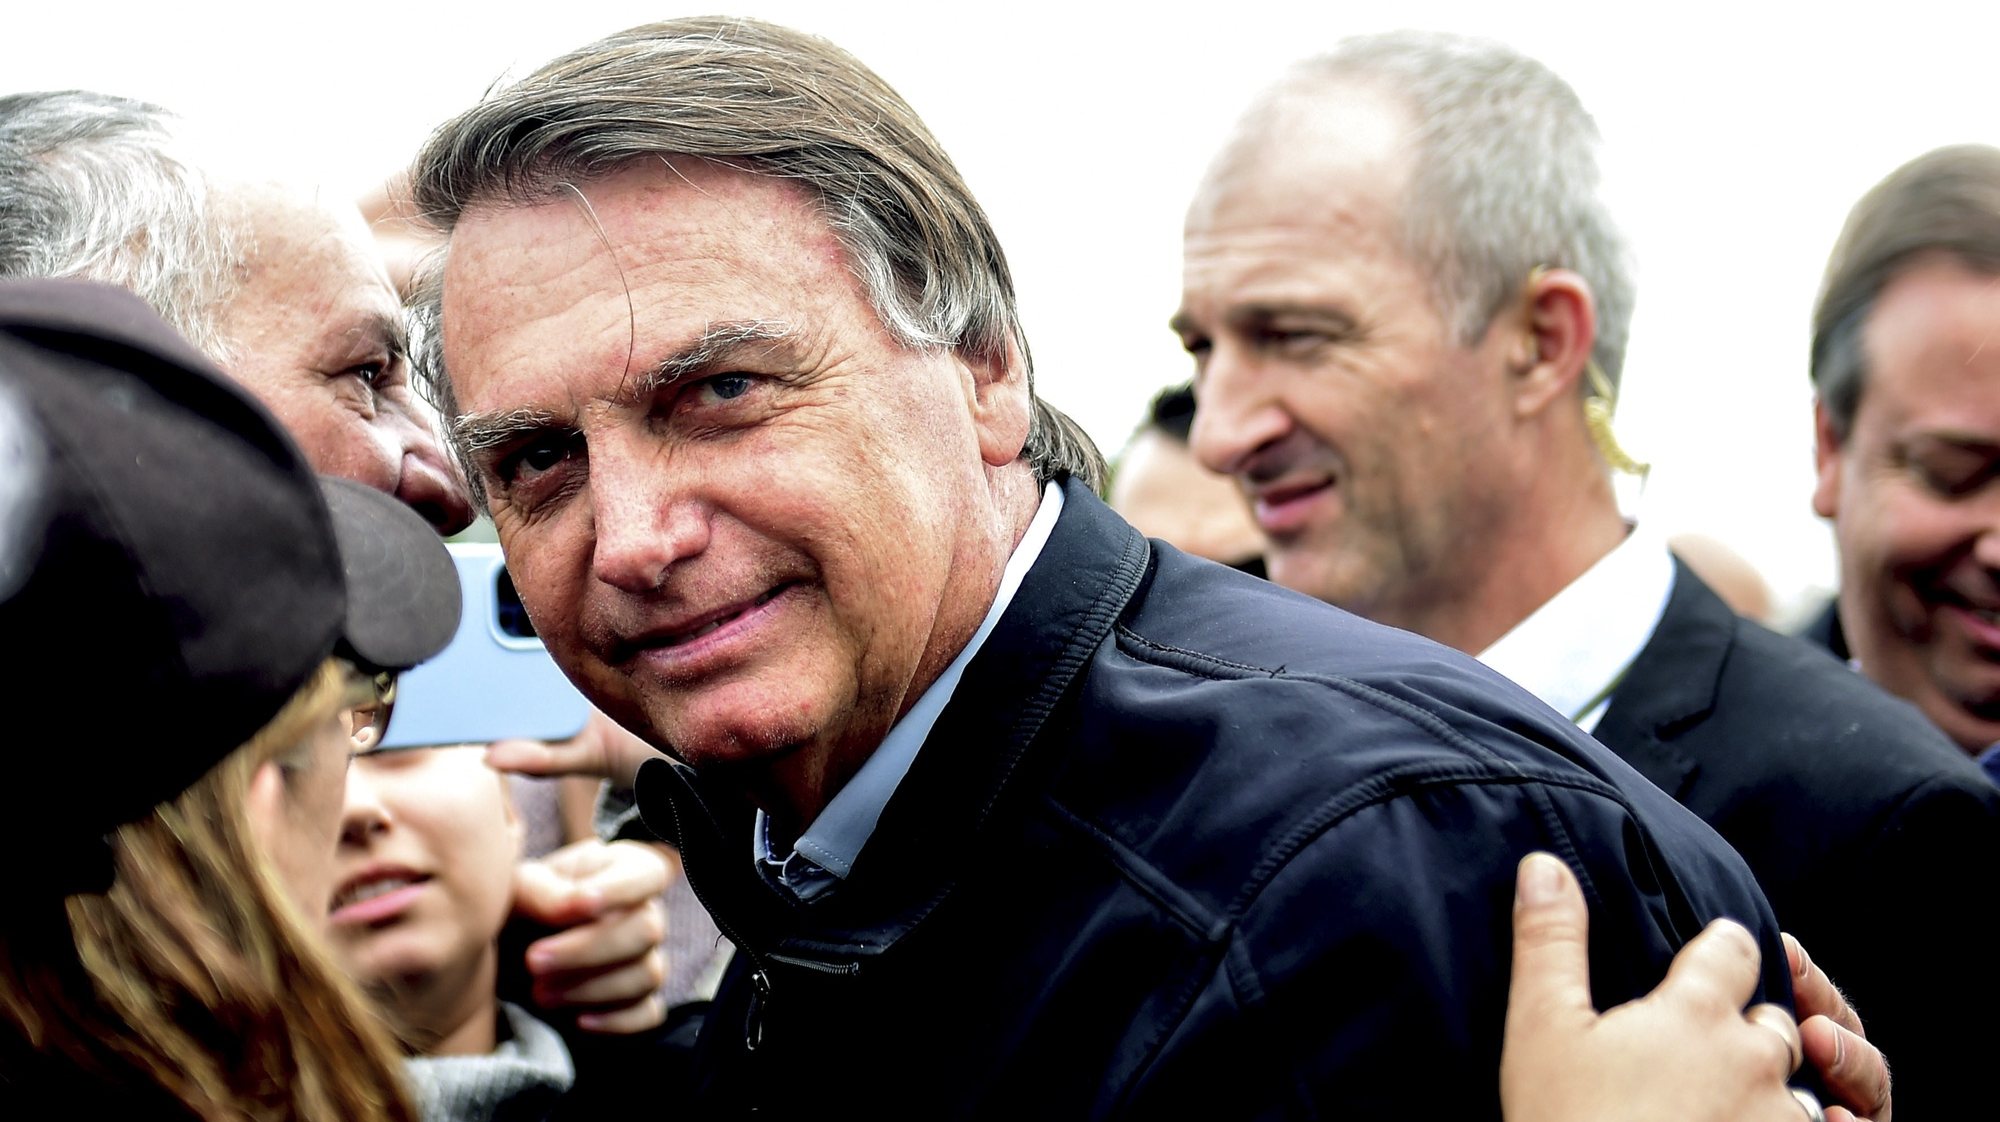 epa10706438 Former Brazilian President Jair Bolsonaro (C) is received by supporters in Porto Alegre, Rio Grande do Sul, Brazil, 22 June 2023. The Superior Electoral Court of Brazil opened on 22 June in Brasilia the first hearing of a trial in which it will analyze the alleged abuses committed by former President Jair Bolsonaro during the campaign for the 2022 October elections. The far-right leader is accused of abusing his position as head of state to promote his candidacy and maintain a harsh discredit campaign against the electoral Justice itself and democratic institutions.  EPA/RICARDO RIMOLI